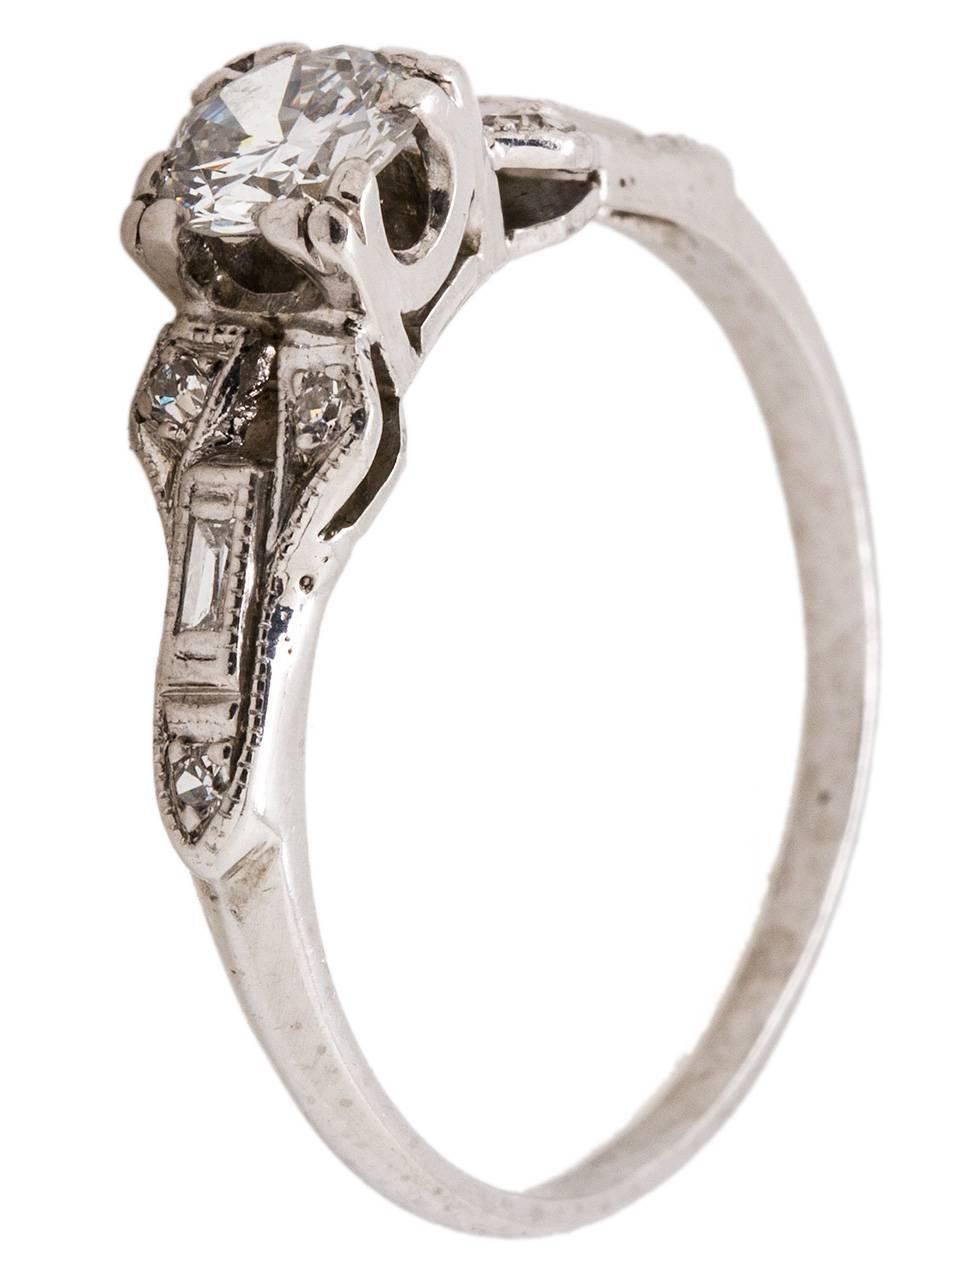 This lovely Art Deco platinum diamond engagement ring is set with a stunning 0.35ct transitional round cut diamond, H/SI1. The whimsical bow-tie design is accented by six single cut and two baguette side diamonds, with a total combined weight of